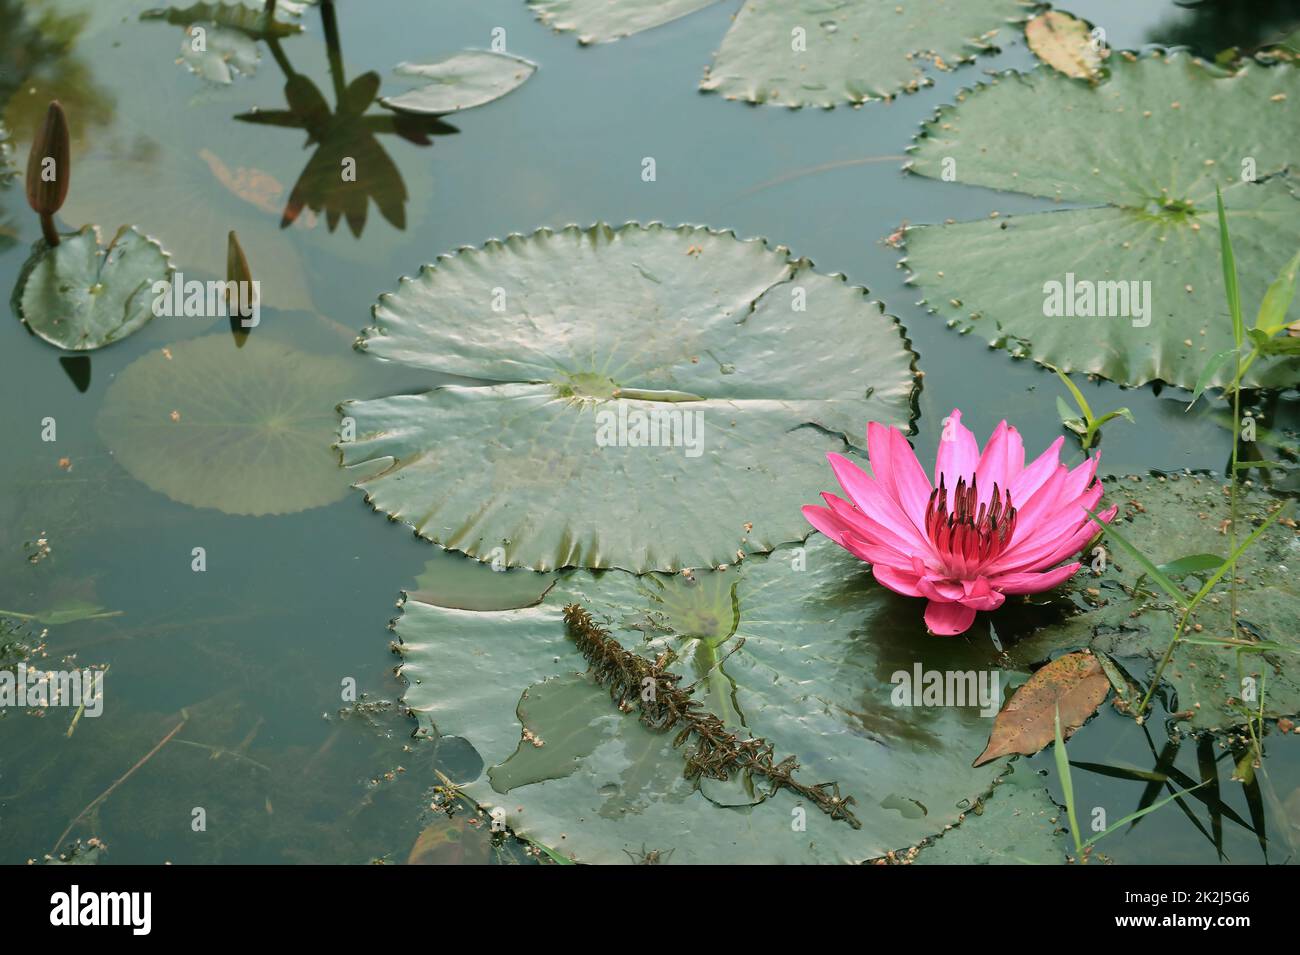 Beautiful Vibrant Pink Water Lily Flower Blossoming in the Pond Stock Photo